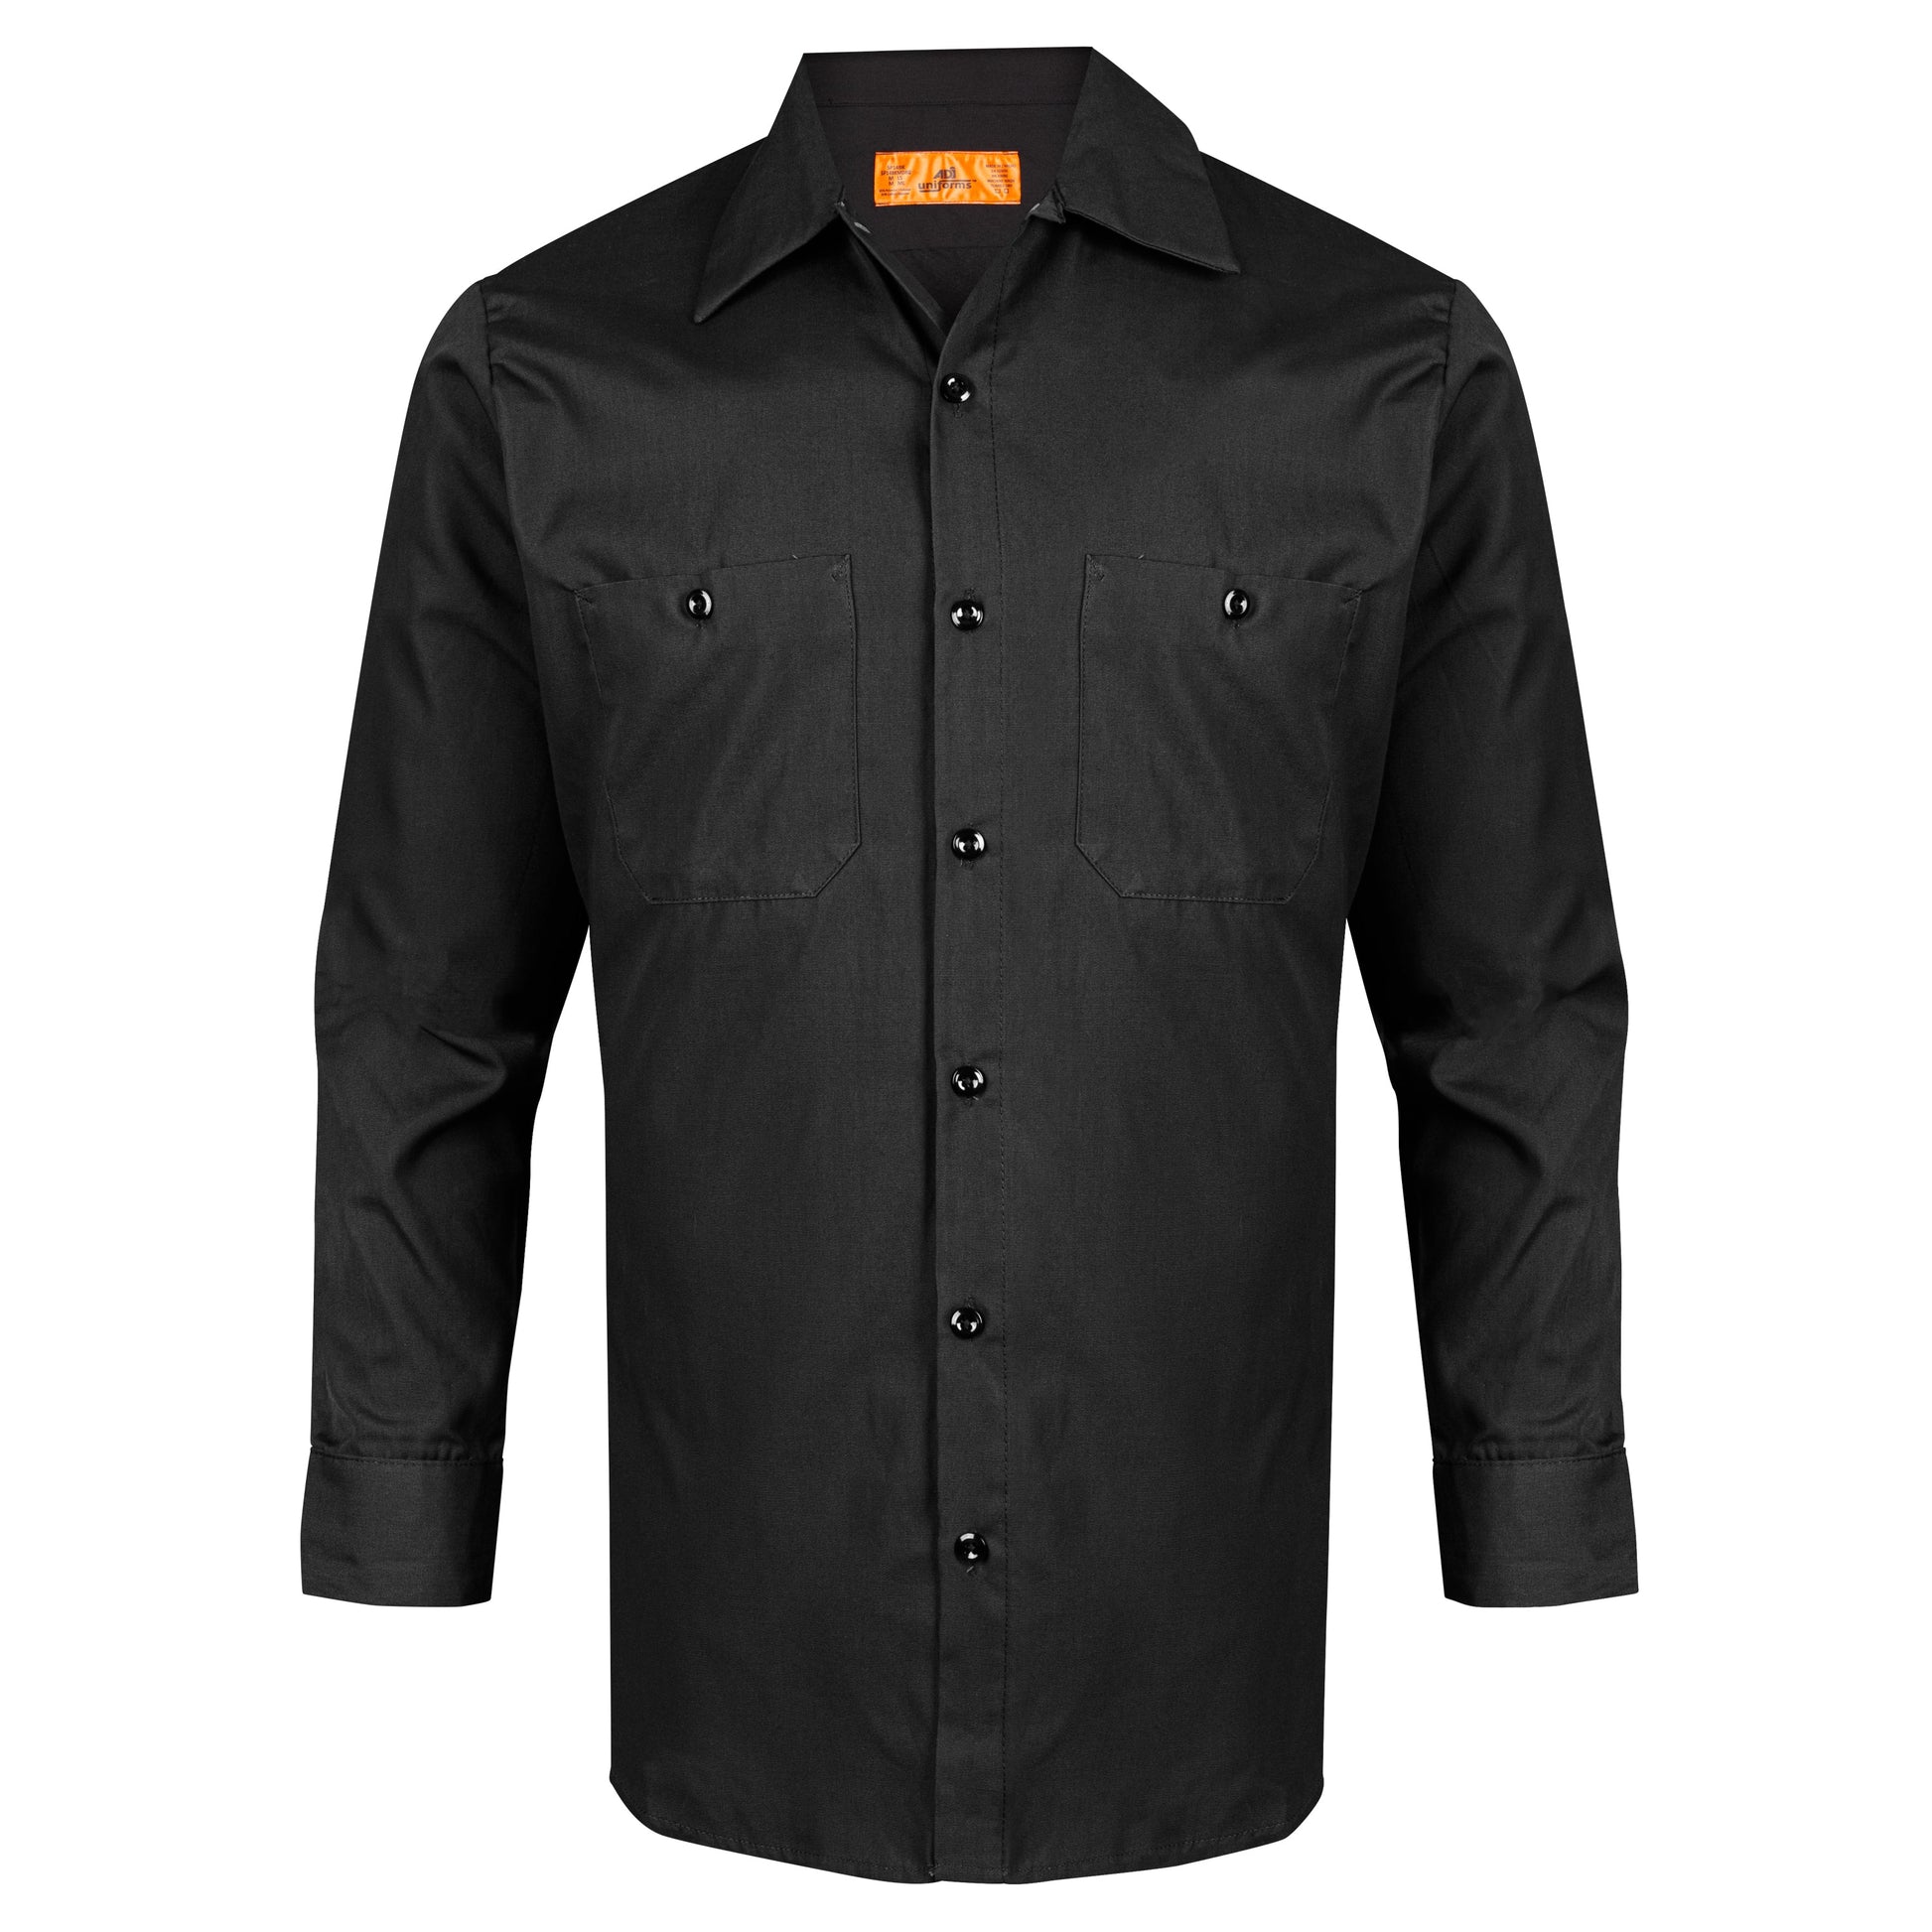 American Dawn | 2X-Large Black Work Shirt With Long Sleeves And 2 Pockets